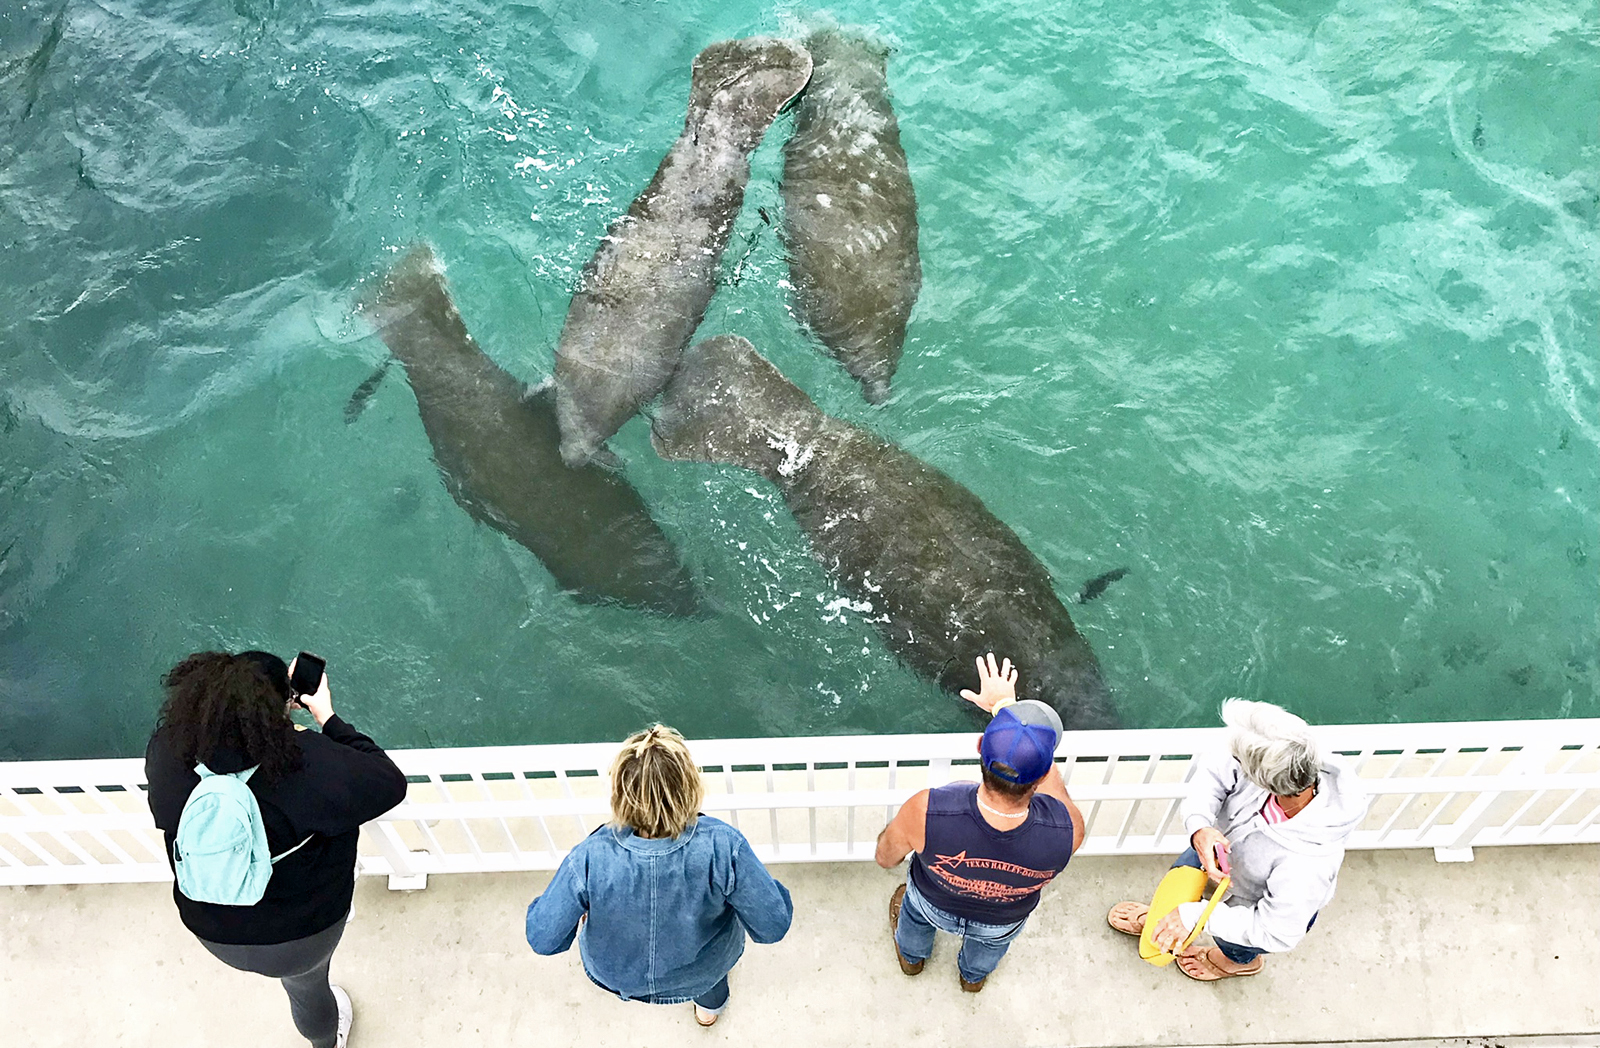 Manatee fesivals: FPL's Manatee Lagoon in West Palm Beach offers an educational festival at its Manatee-oriented Eco-Discovery Center.